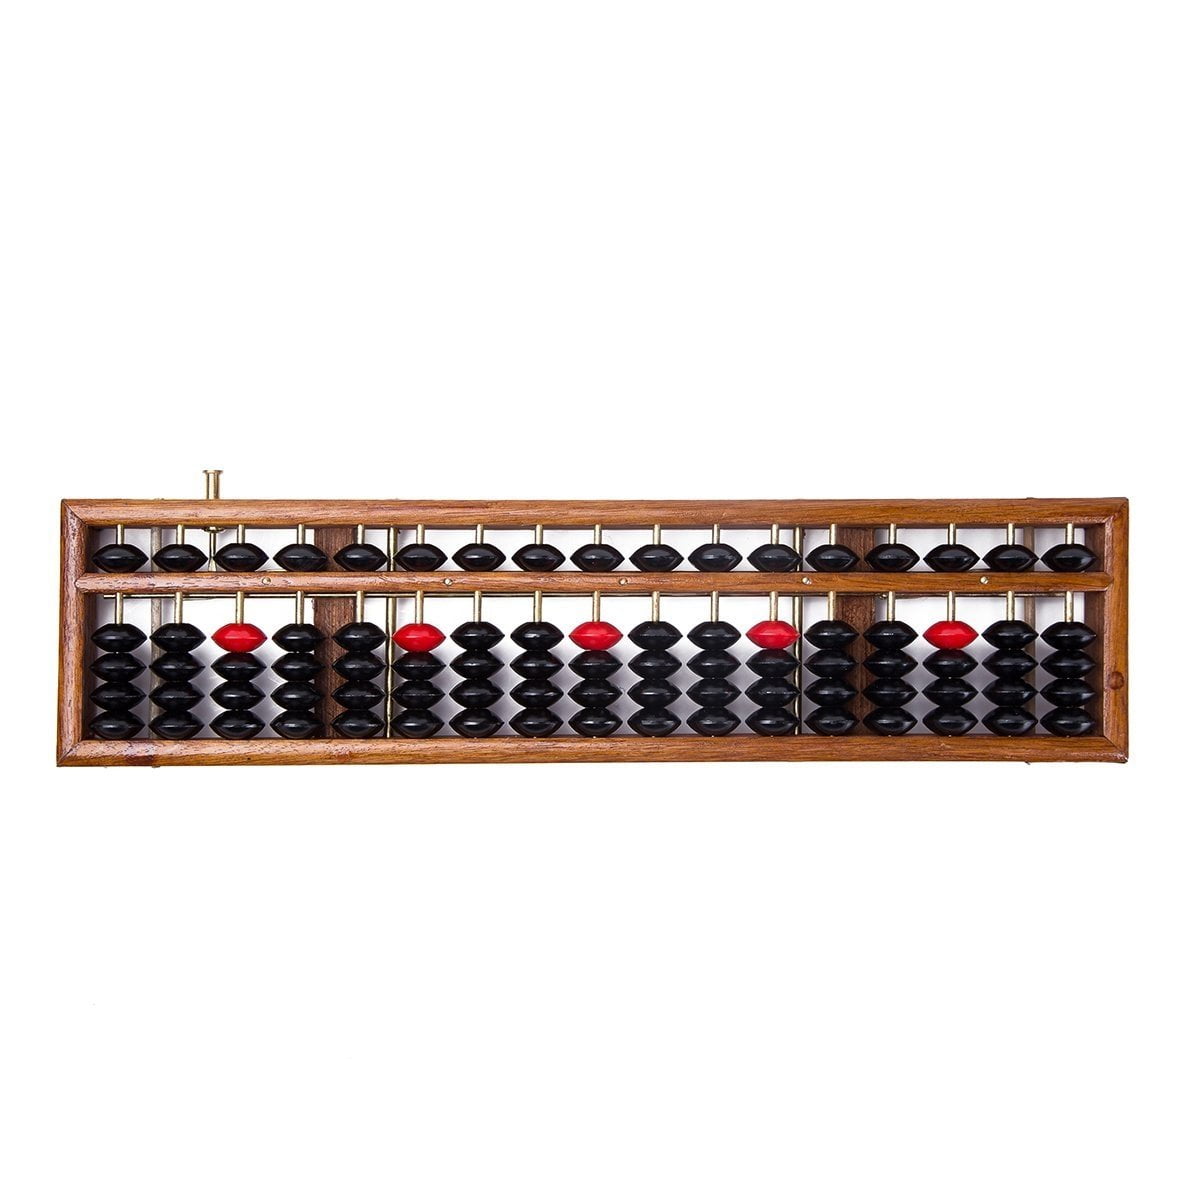 Details about   Vintage Style Wooden Abacus Professional 17 Column Soroban 15.75 Inches 